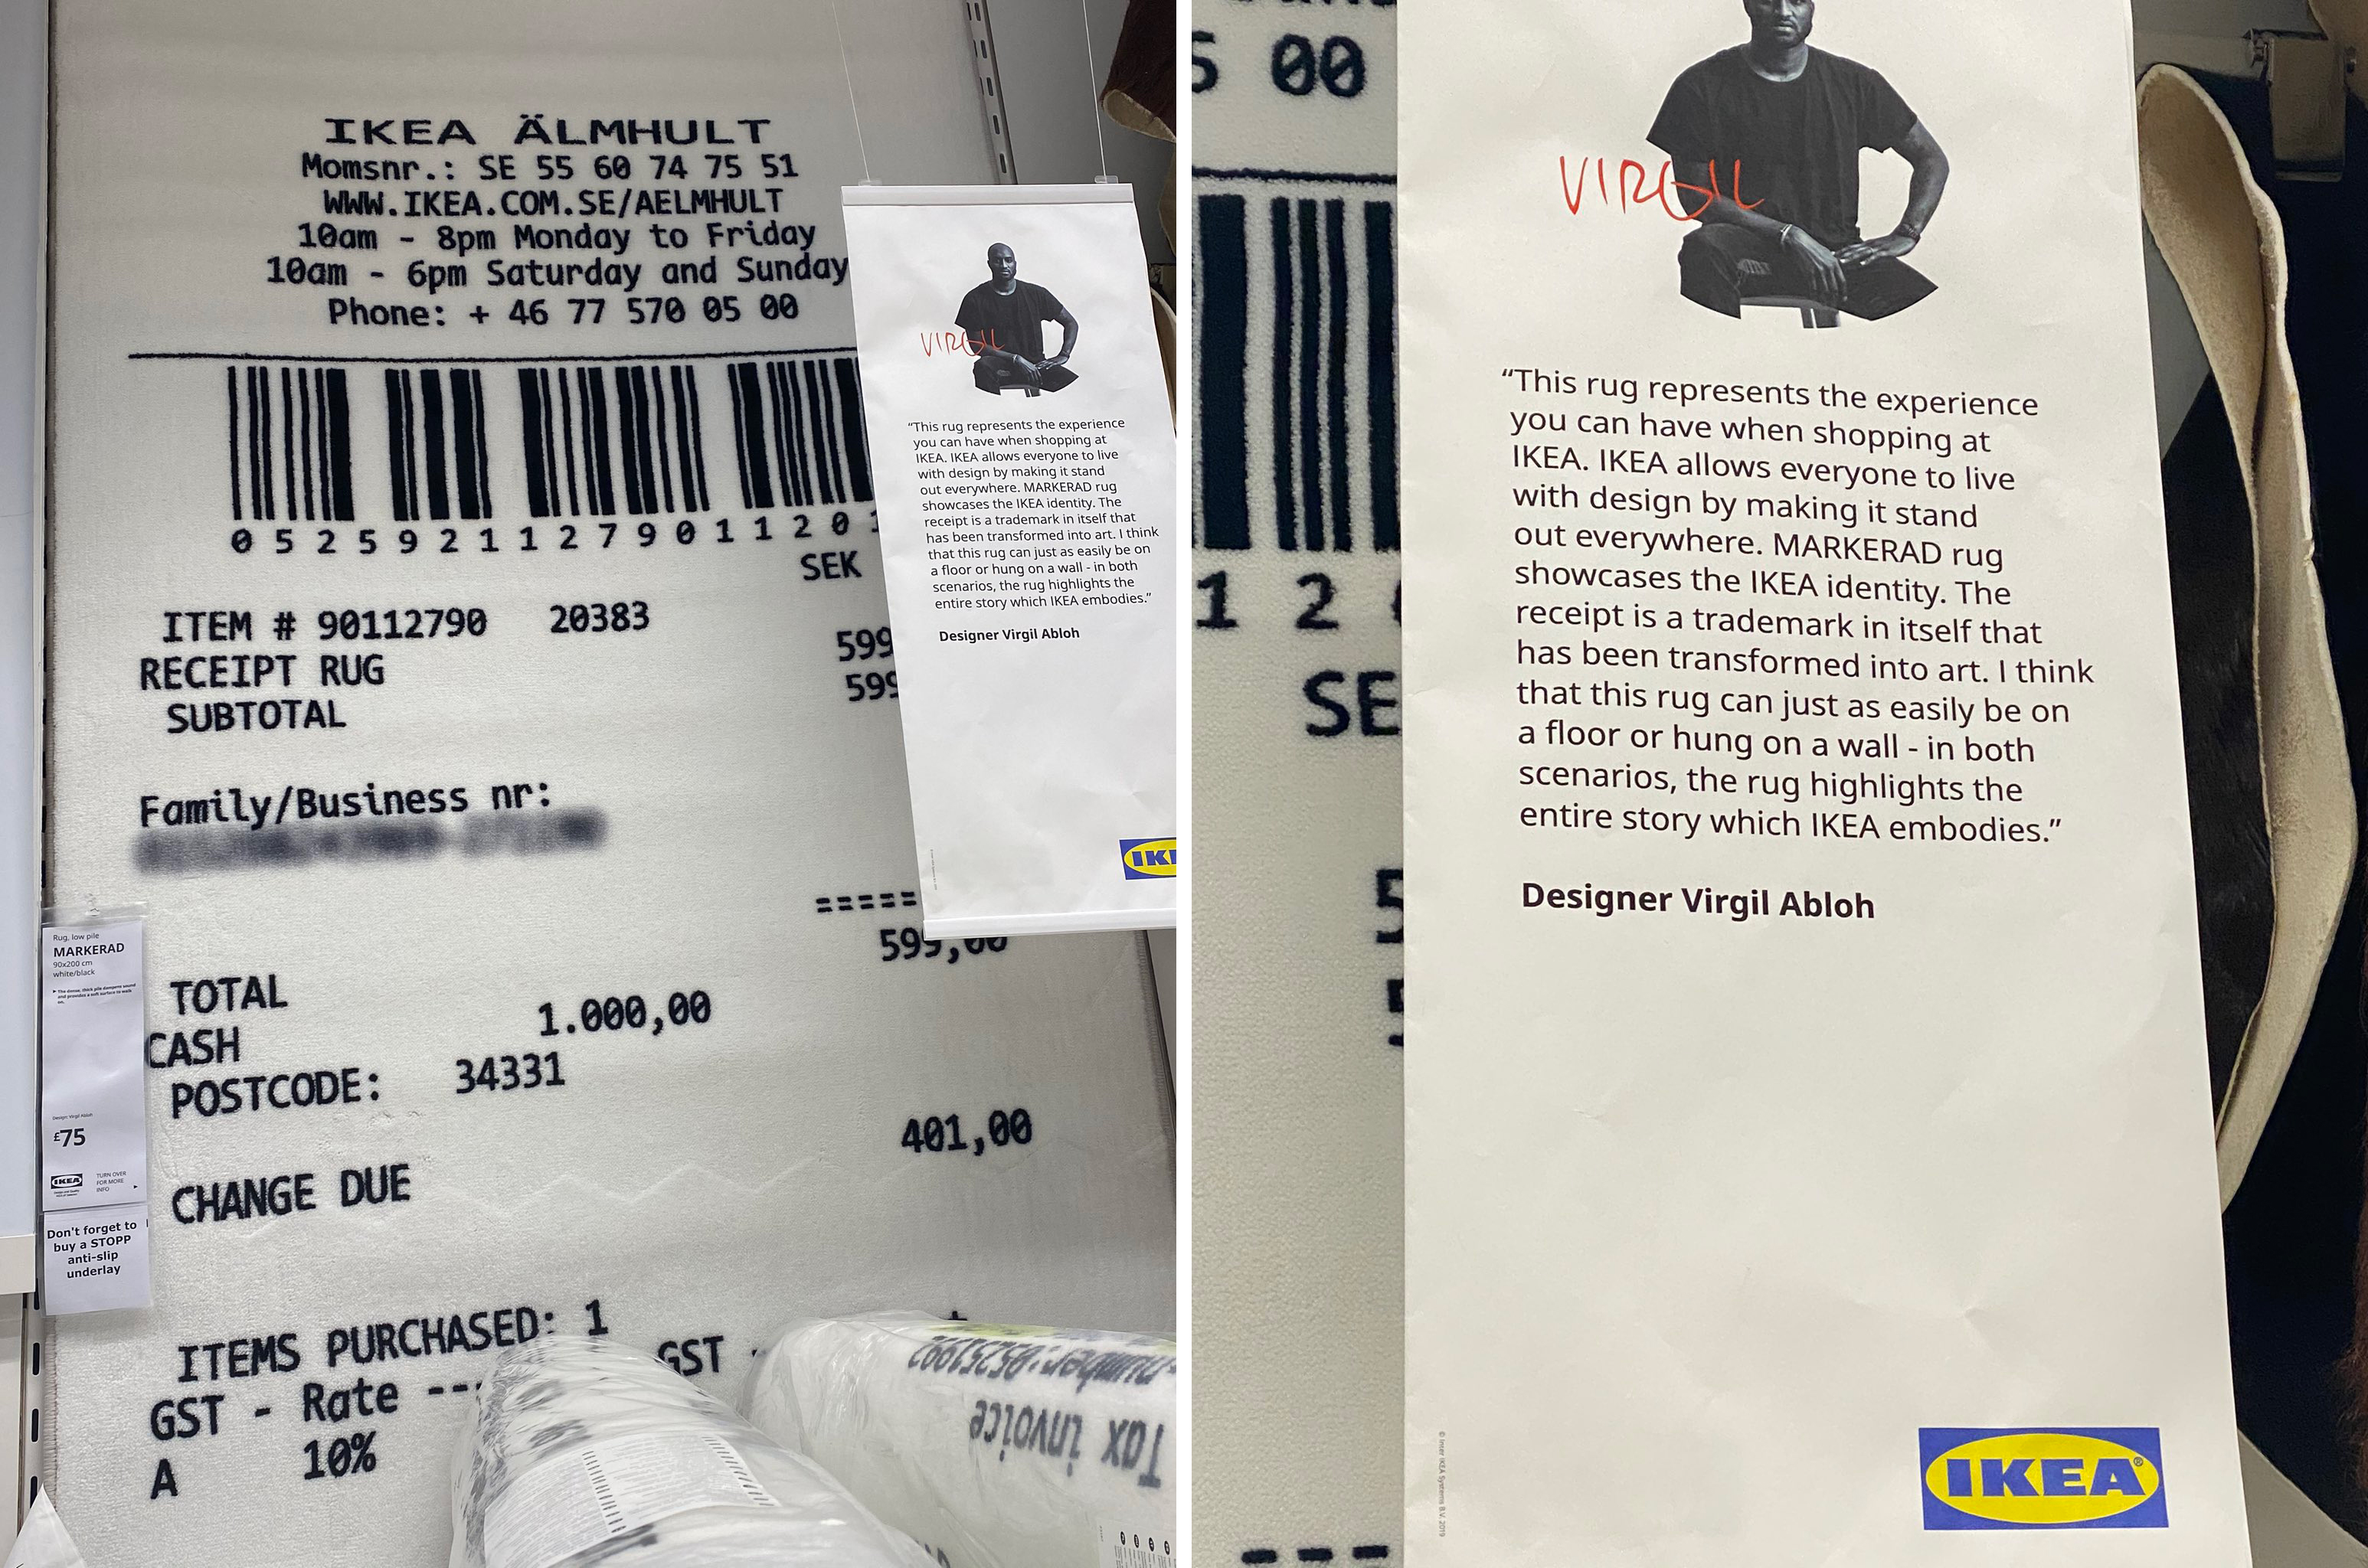 Designer Trolled IKEA by Just Putting a Giant IKEA Receipt on a Rug - Funny Gallery | eBaum&#39;s World